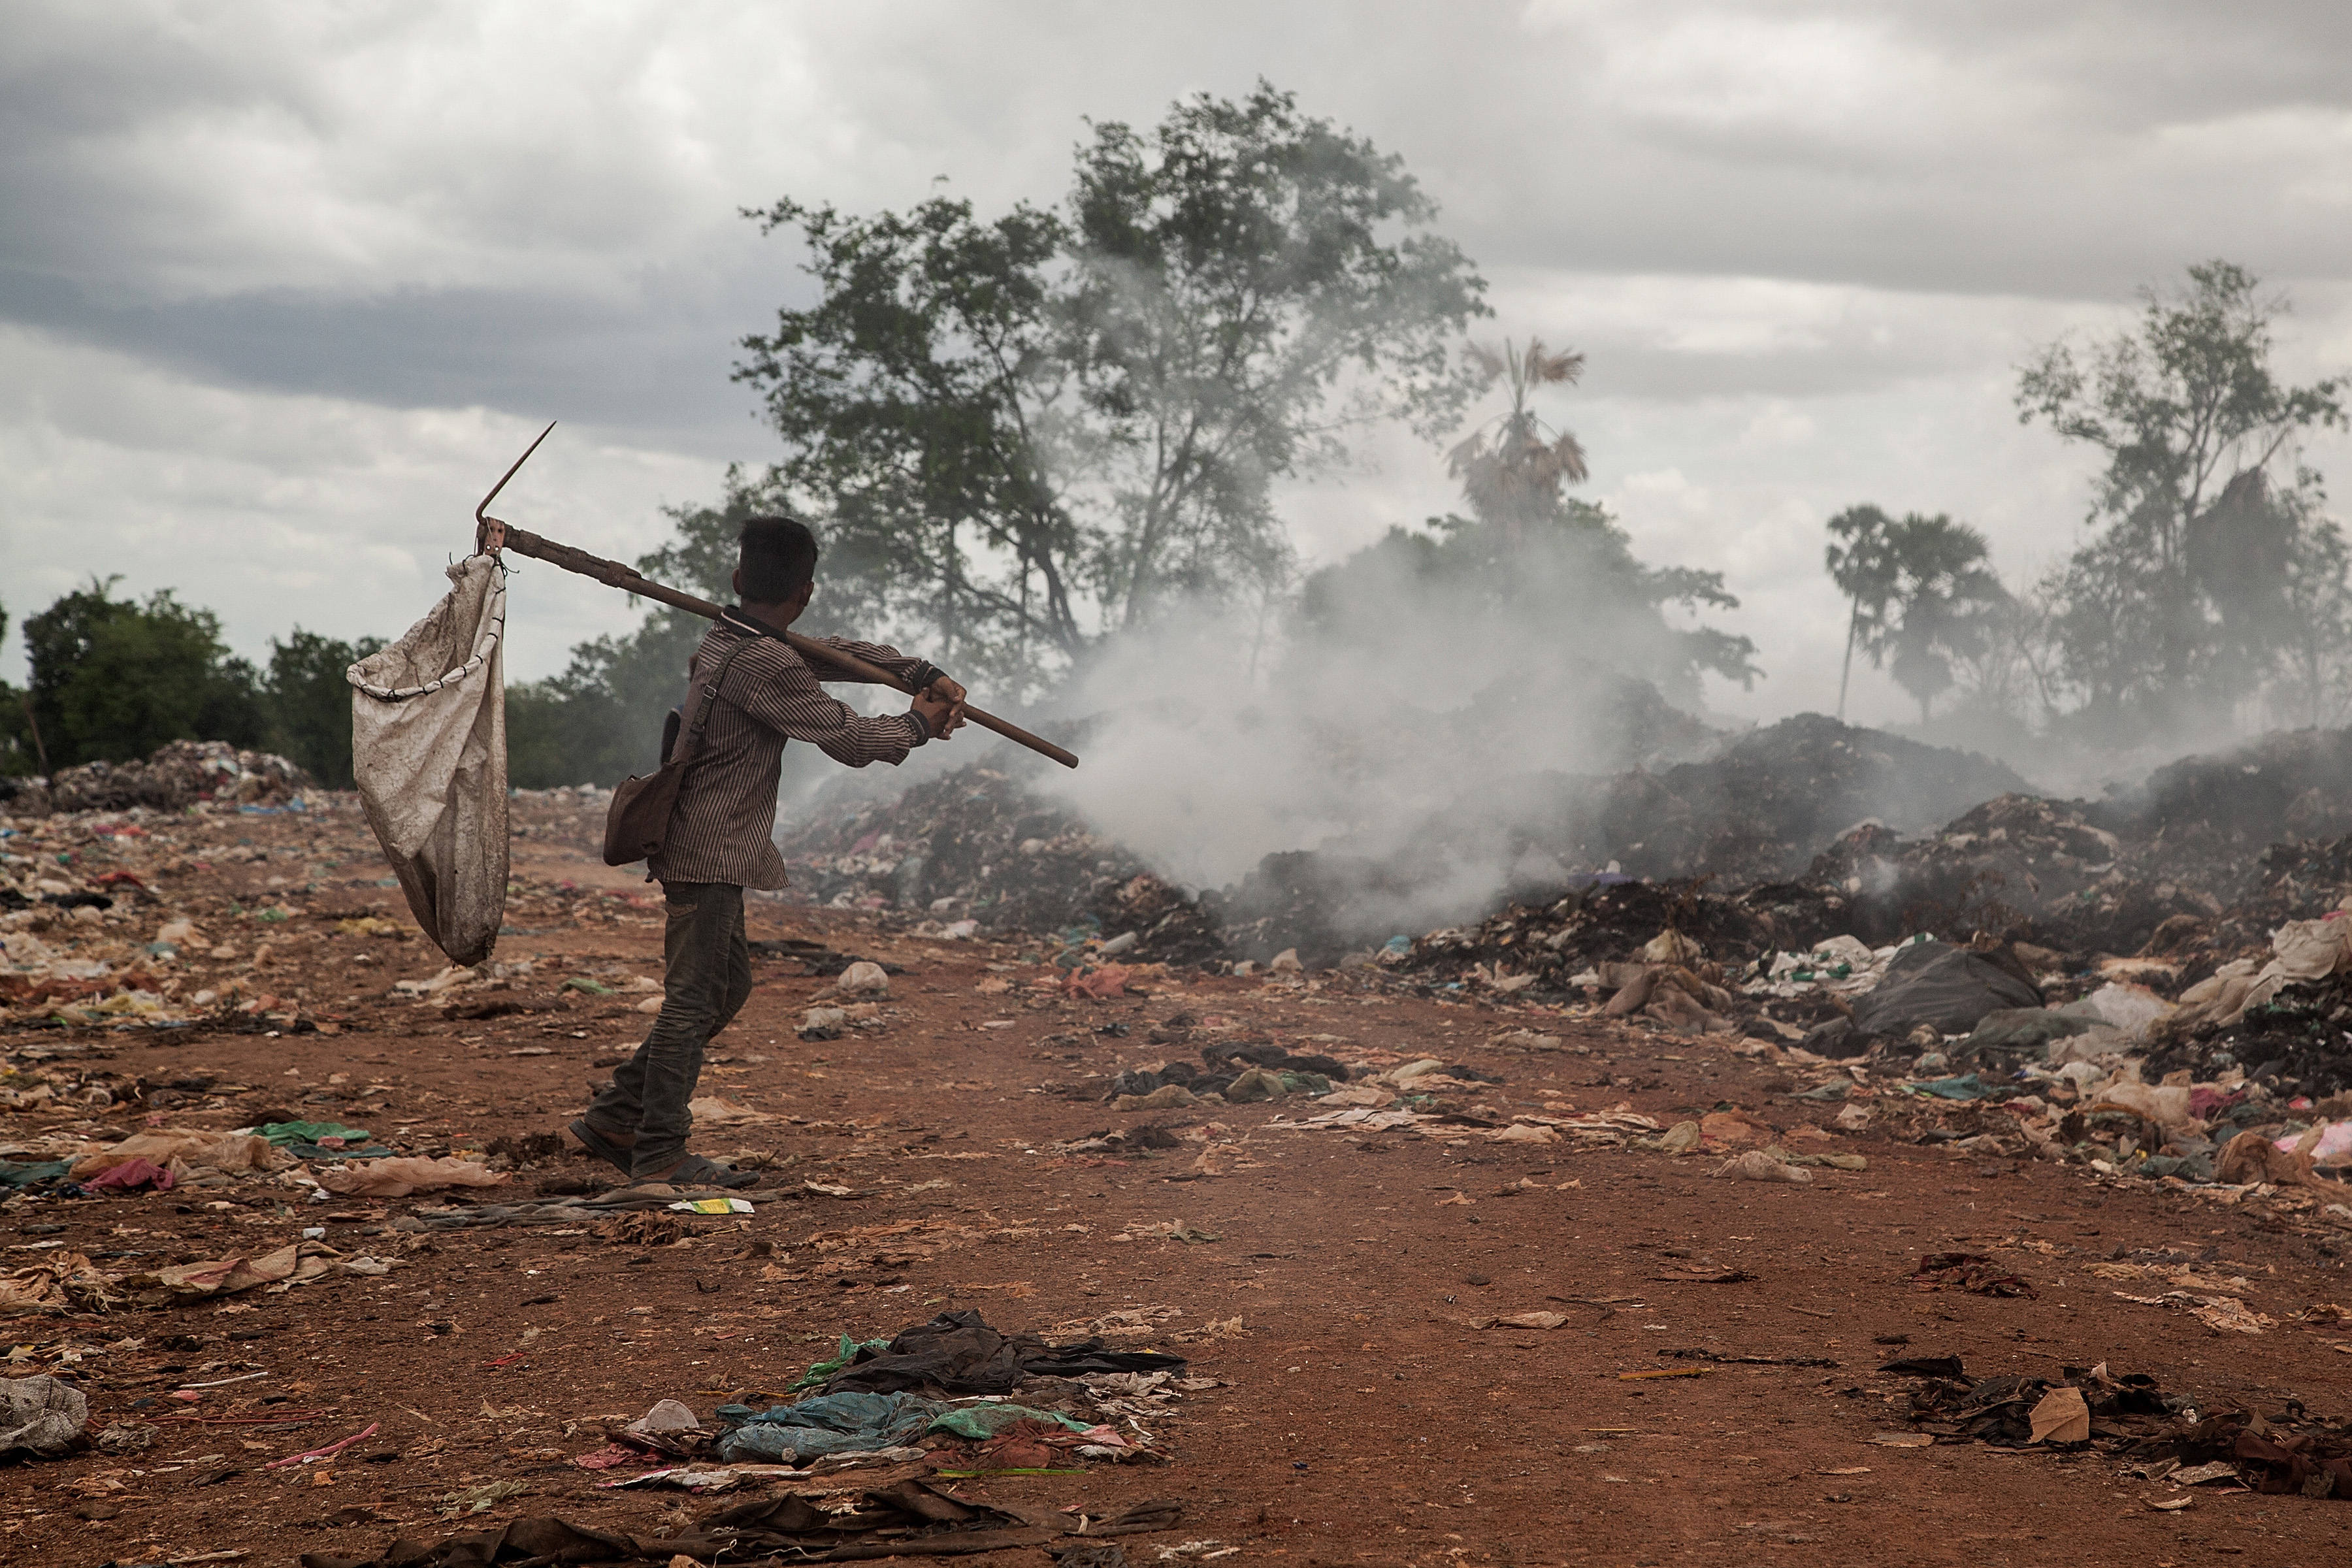 A young scavenger walks near a burning pile of trash in the Anlong Pi landfill on June 11, 2014 in Siem Reap, Cambodia. 